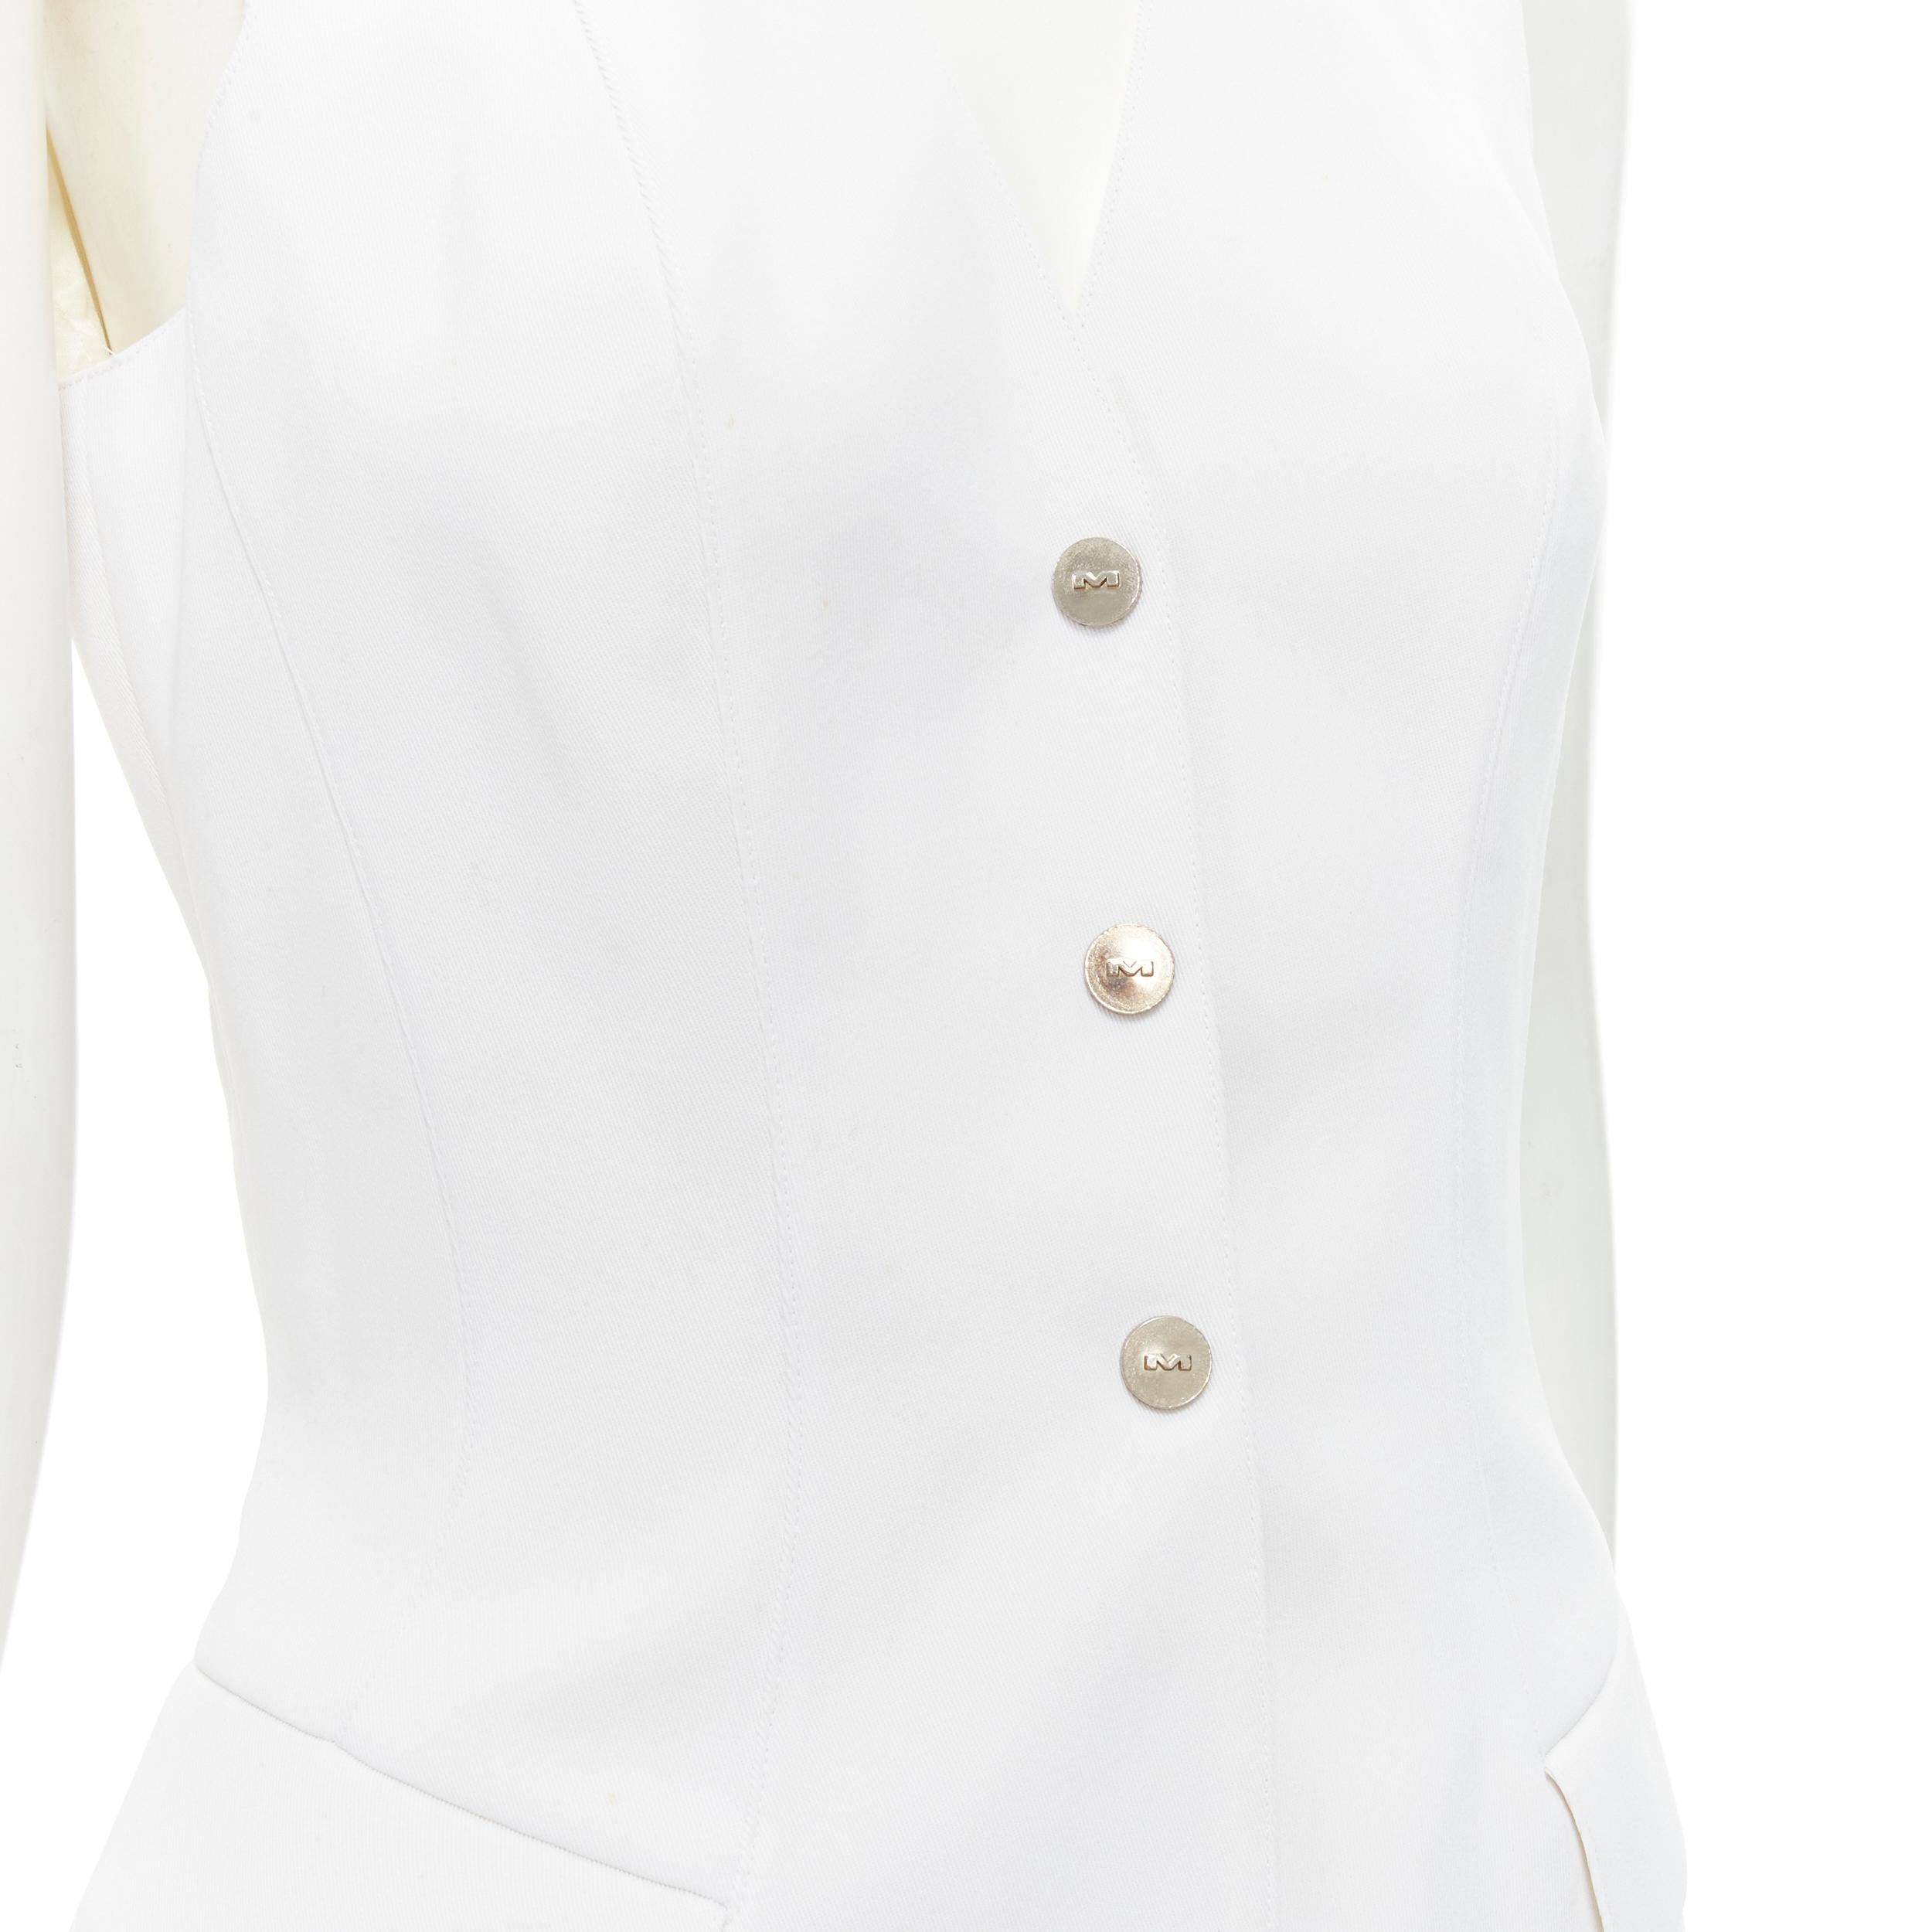 MUGLER VIntage white polyester body sculpted seams silver button vest M 
Reference: GIYG/A00248 
Brand: Mugler 
Material: Polyester 
Color: White 
Pattern: Solid 
Closure: Snap button 
Extra Detail: Brown M logo buttons. Bodycon sculpted seams.